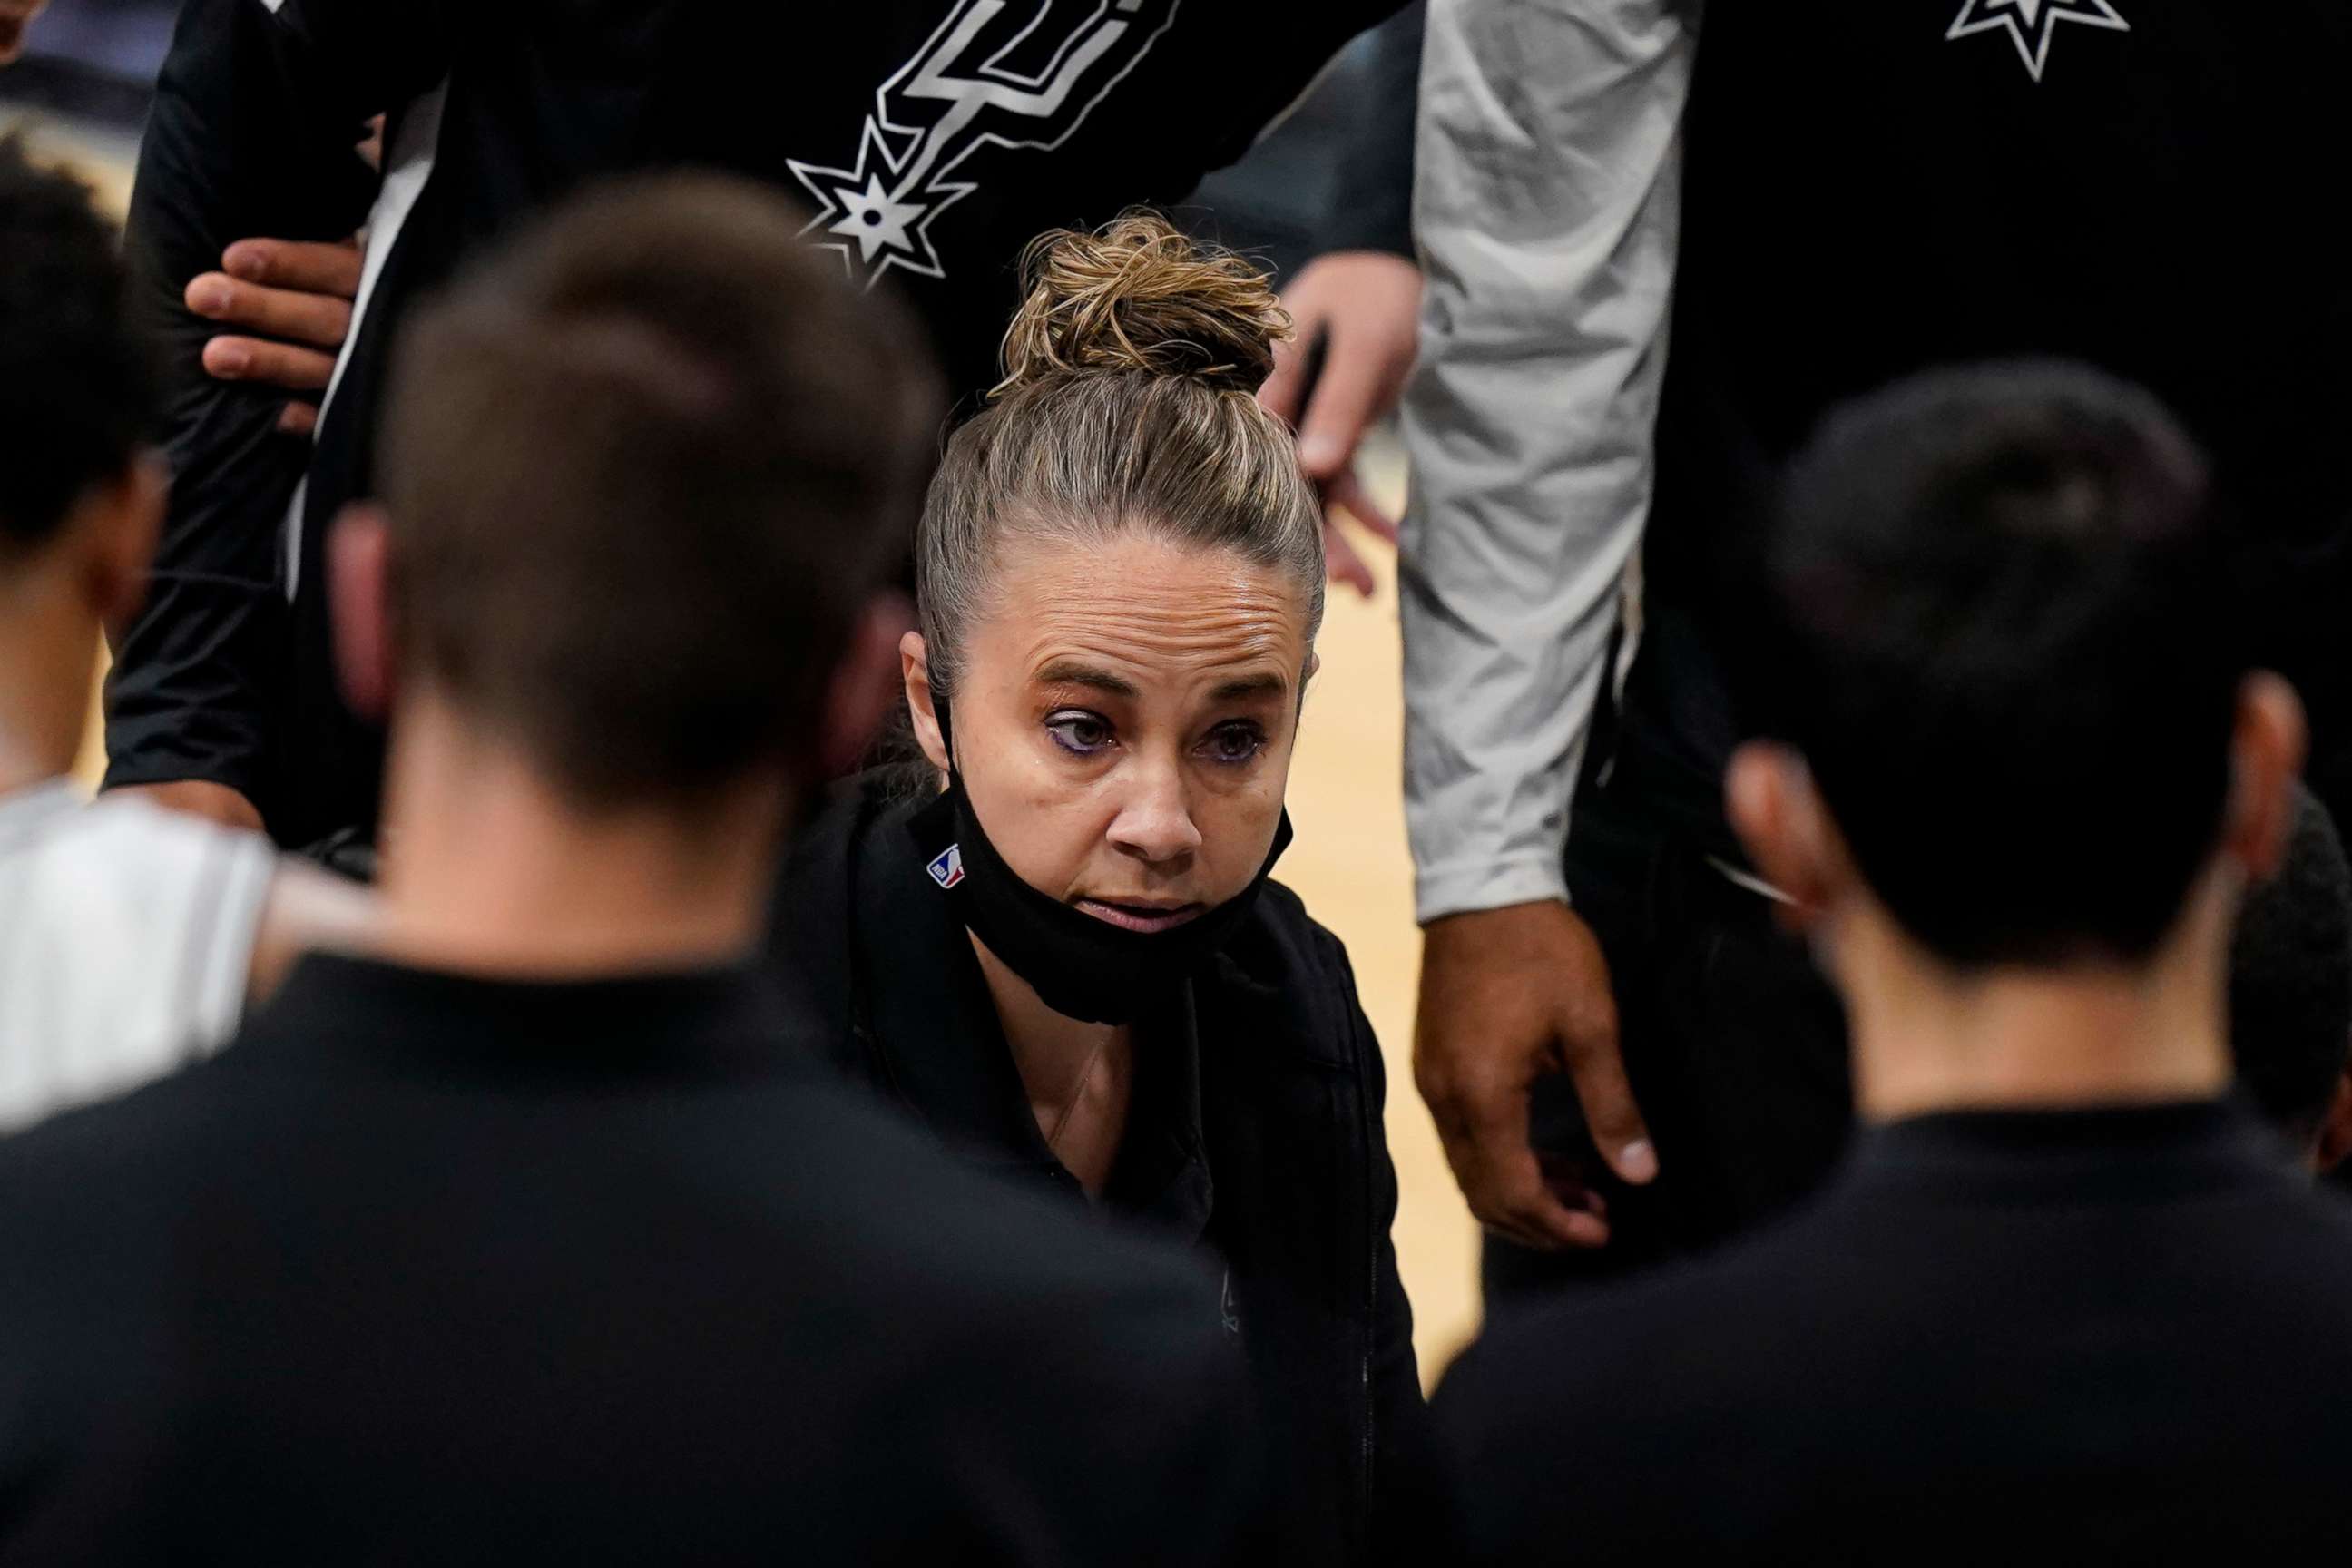 PHOTO: San Antonio Spurs assistant coach Becky Hammon calls a play during a timeout in the second half of the team's NBA basketball game against the Los Angeles Lakers, after coach Gregg Popovich was ejected, Dec. 30, 2020, in San Antonio.